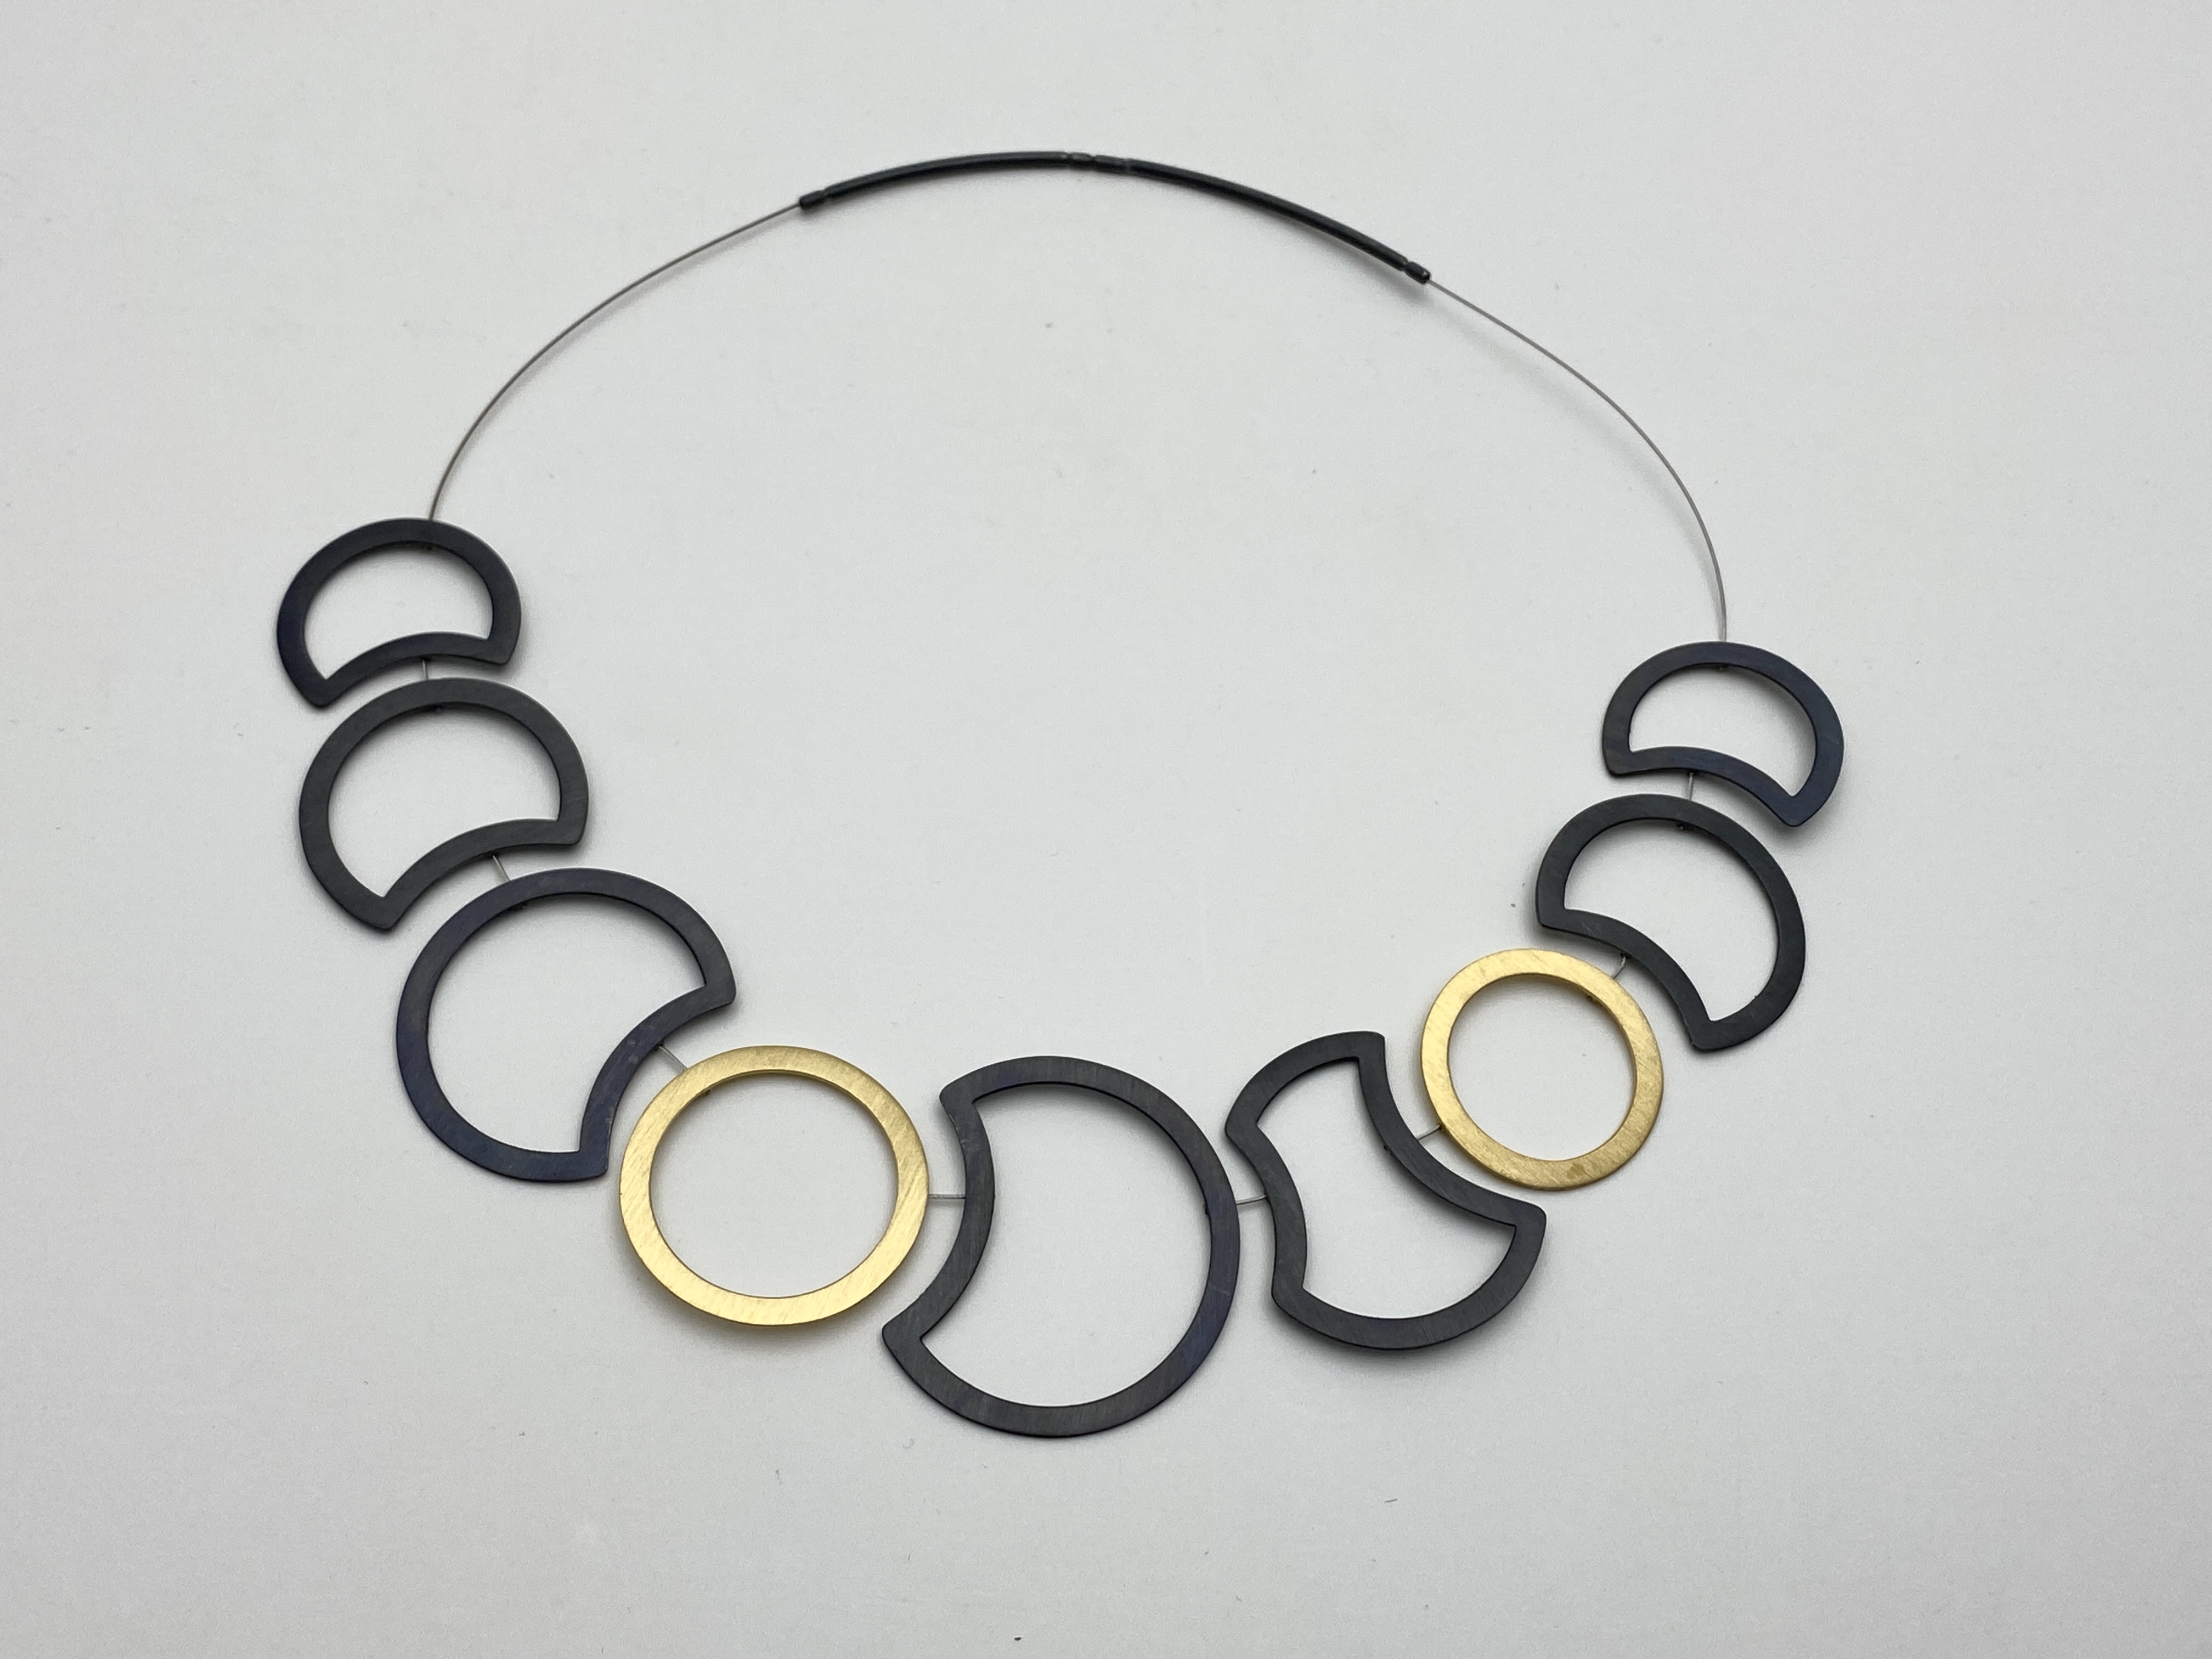 Gold Vermeil Circles over Crescent Moon Shaped Oxidized Sterling Silver Necklace - BAS80A